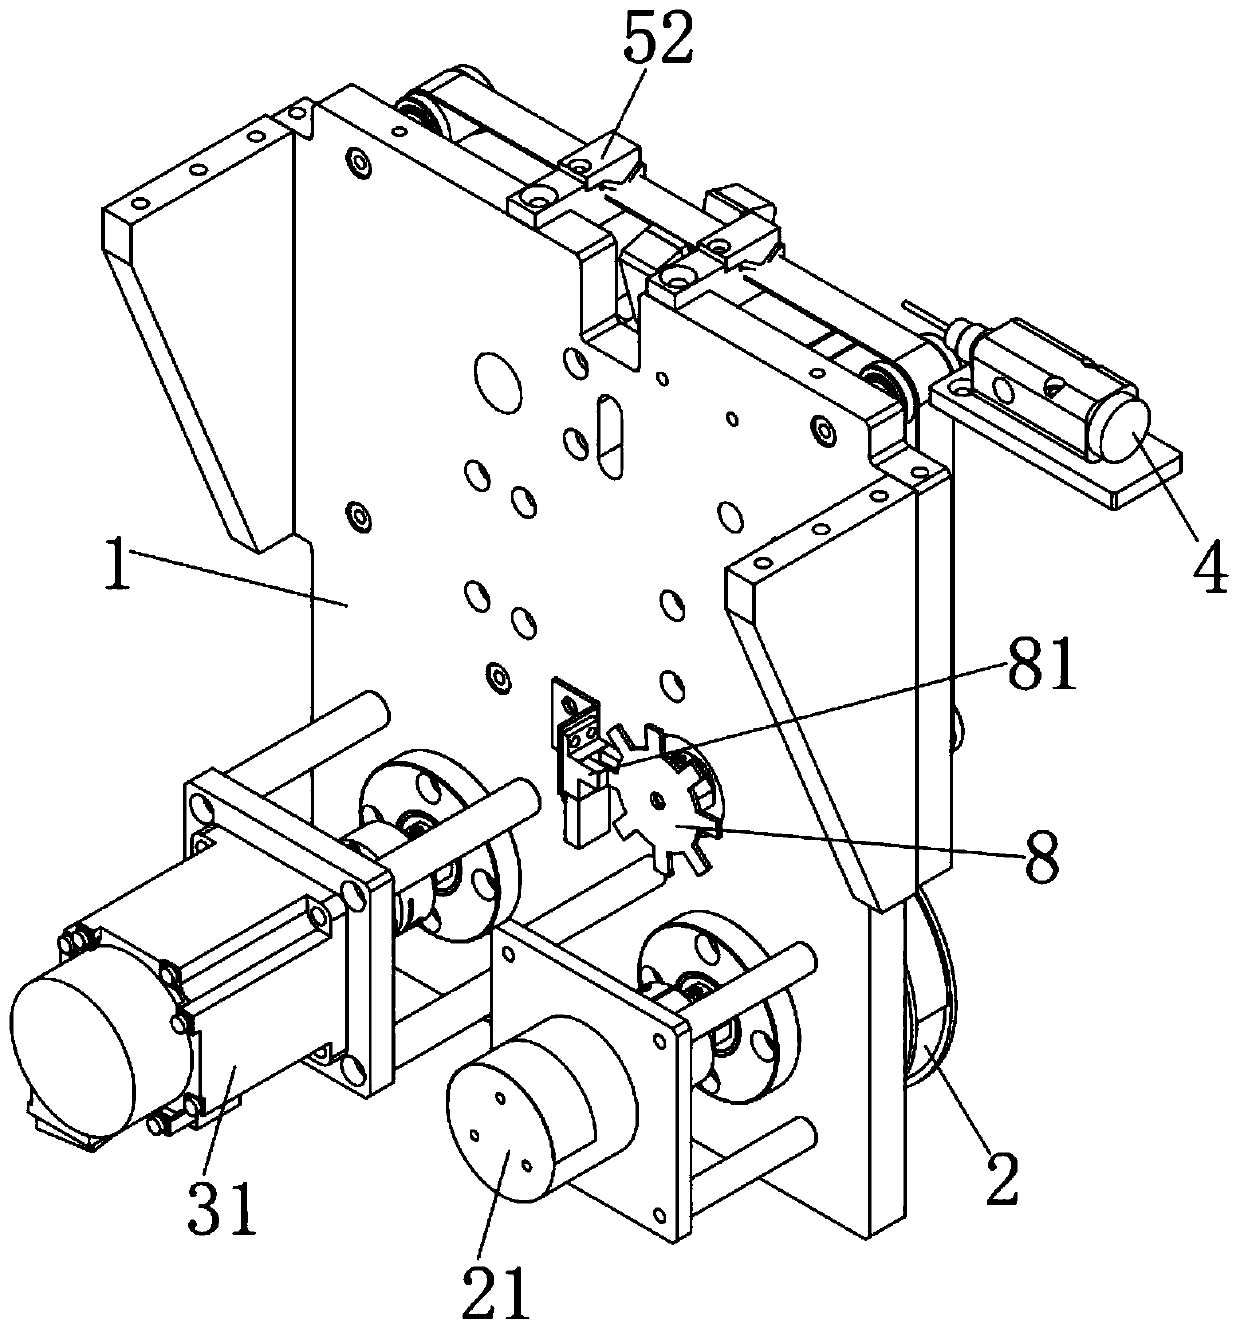 Dispensing valve needle cleaning and wiping mechanism